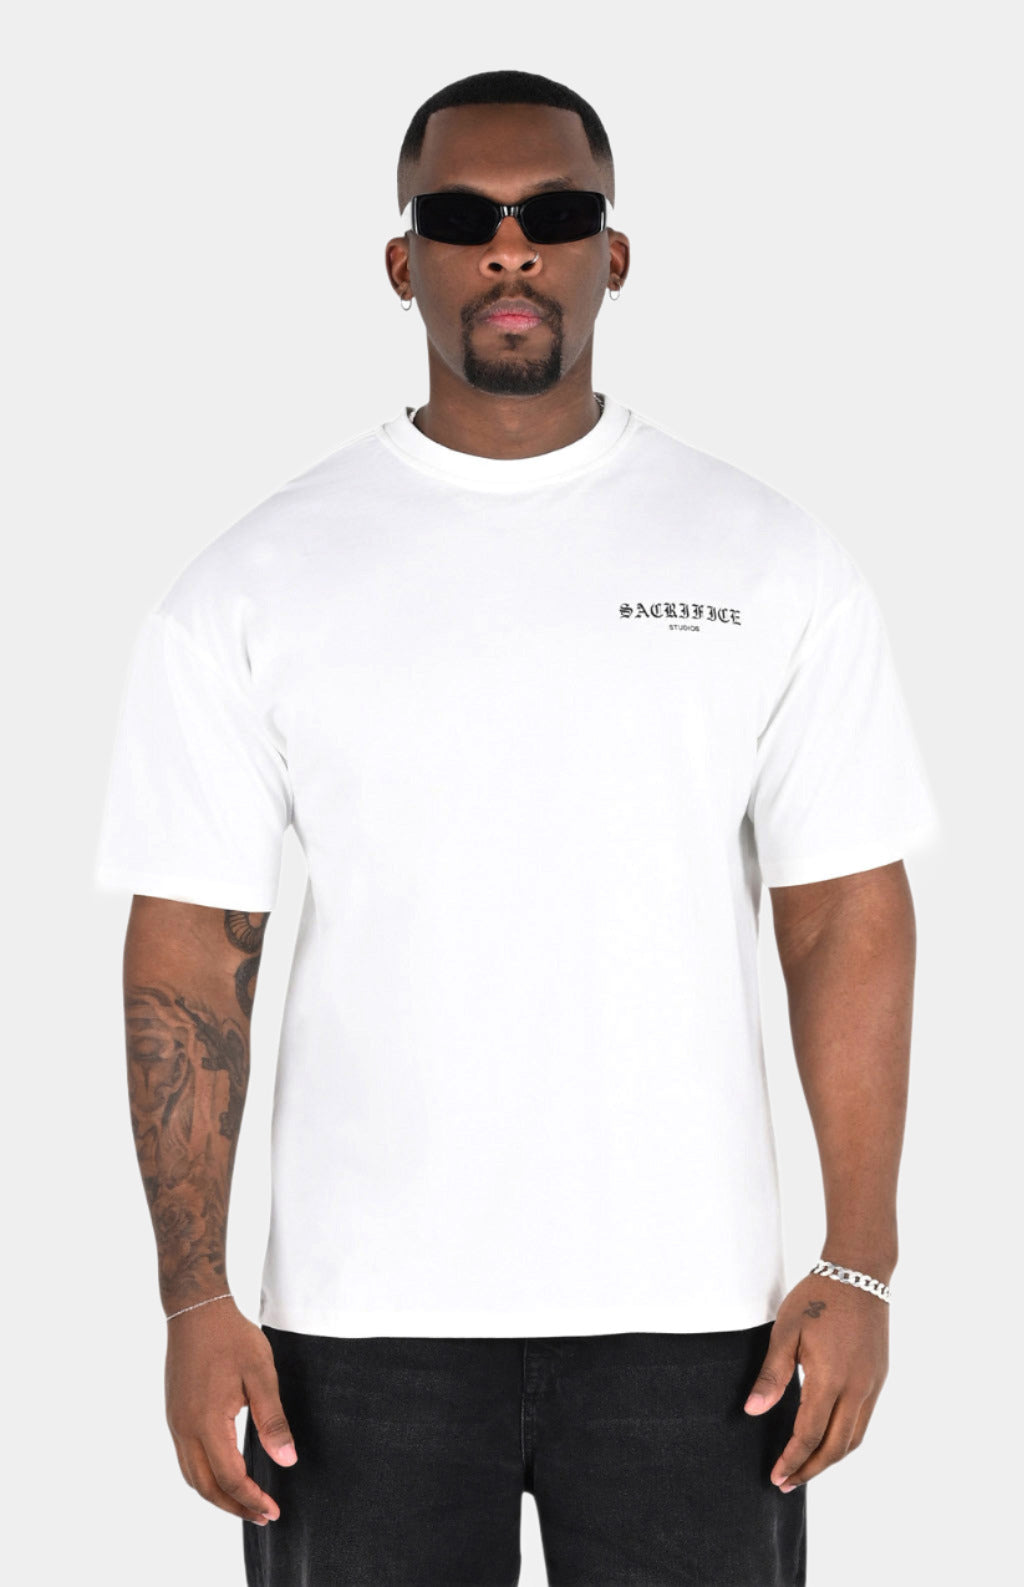 Premium Streetwear Heavy-weight T-Shirt. Expertly crafted in Portugal. Located in Dubai.